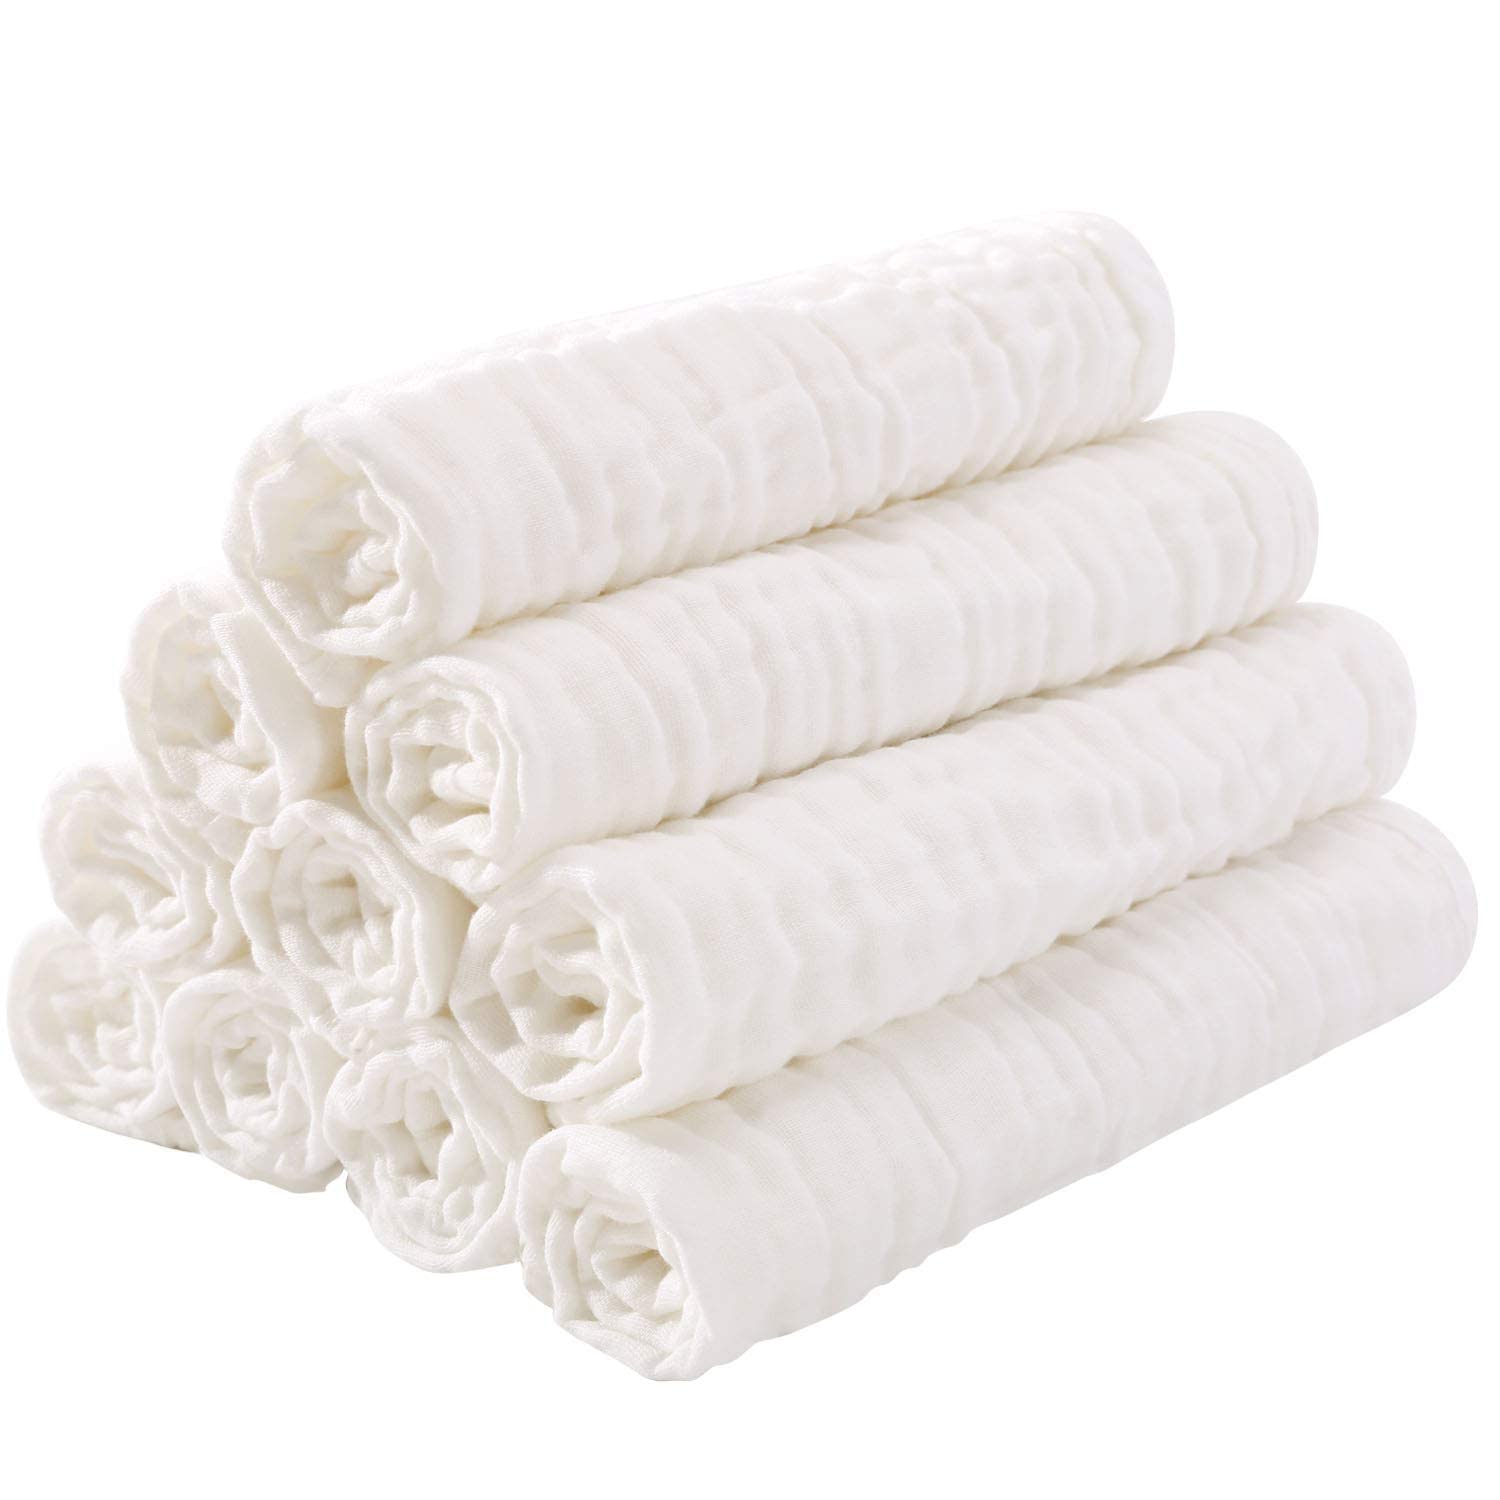 Yoofoss Muslin Squares 10 Pack Muslin Cloths 4 Layer Super Soft and Absorbent Baby Washcloths 100% Cotton 35x50cm White